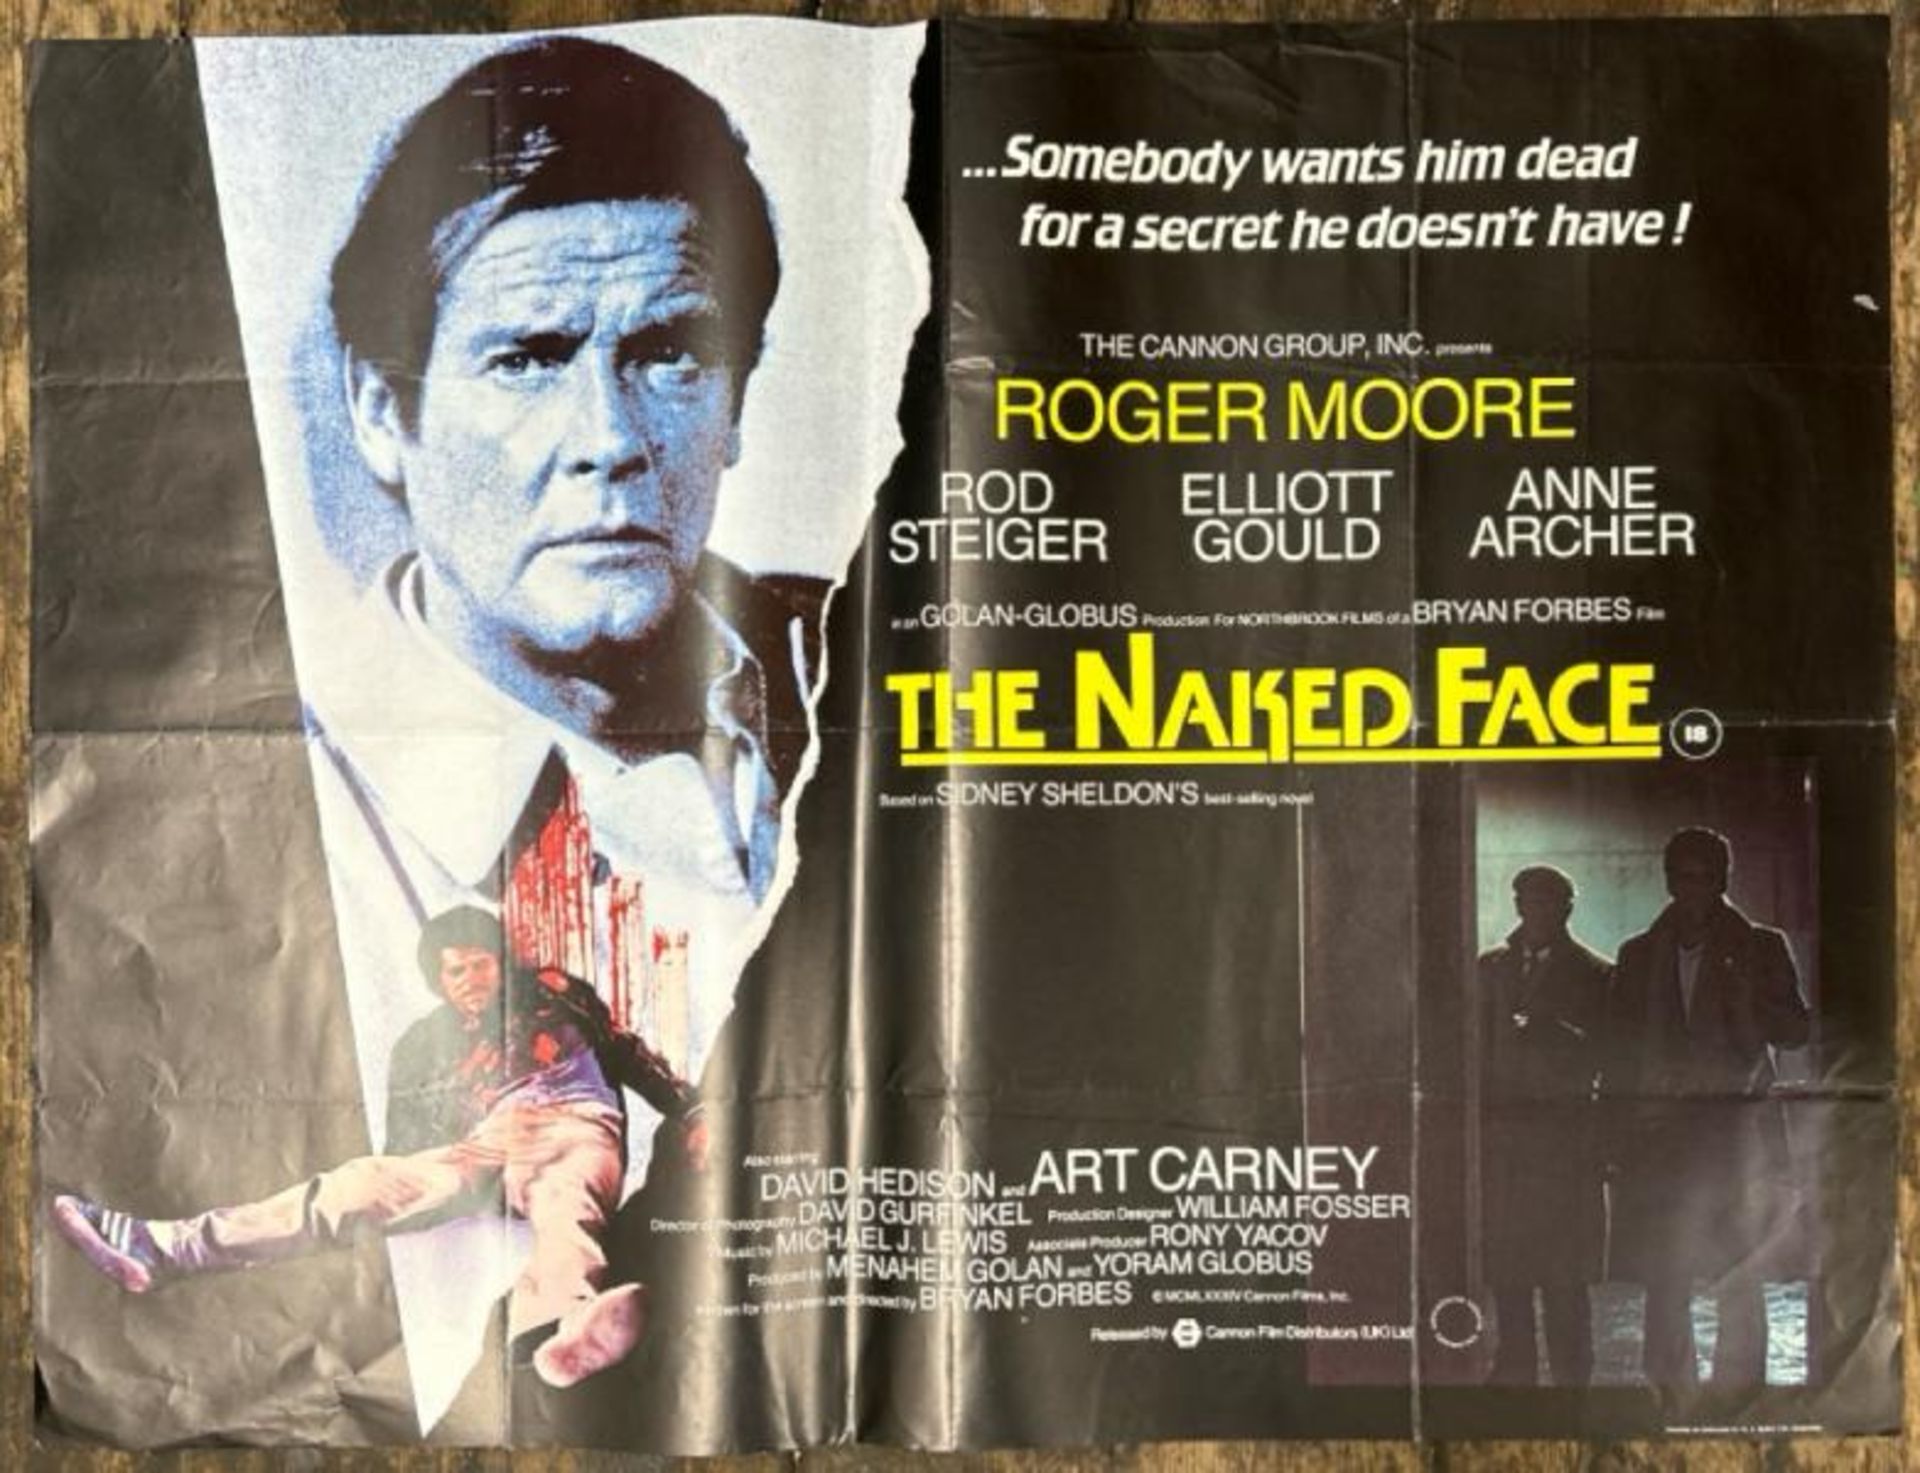 THE NAKED FACE STARRING ROGER MOORE, ORIGINAL FILM POTER, PRINTED IN ENGLAND BY W. E. BERRY LTD